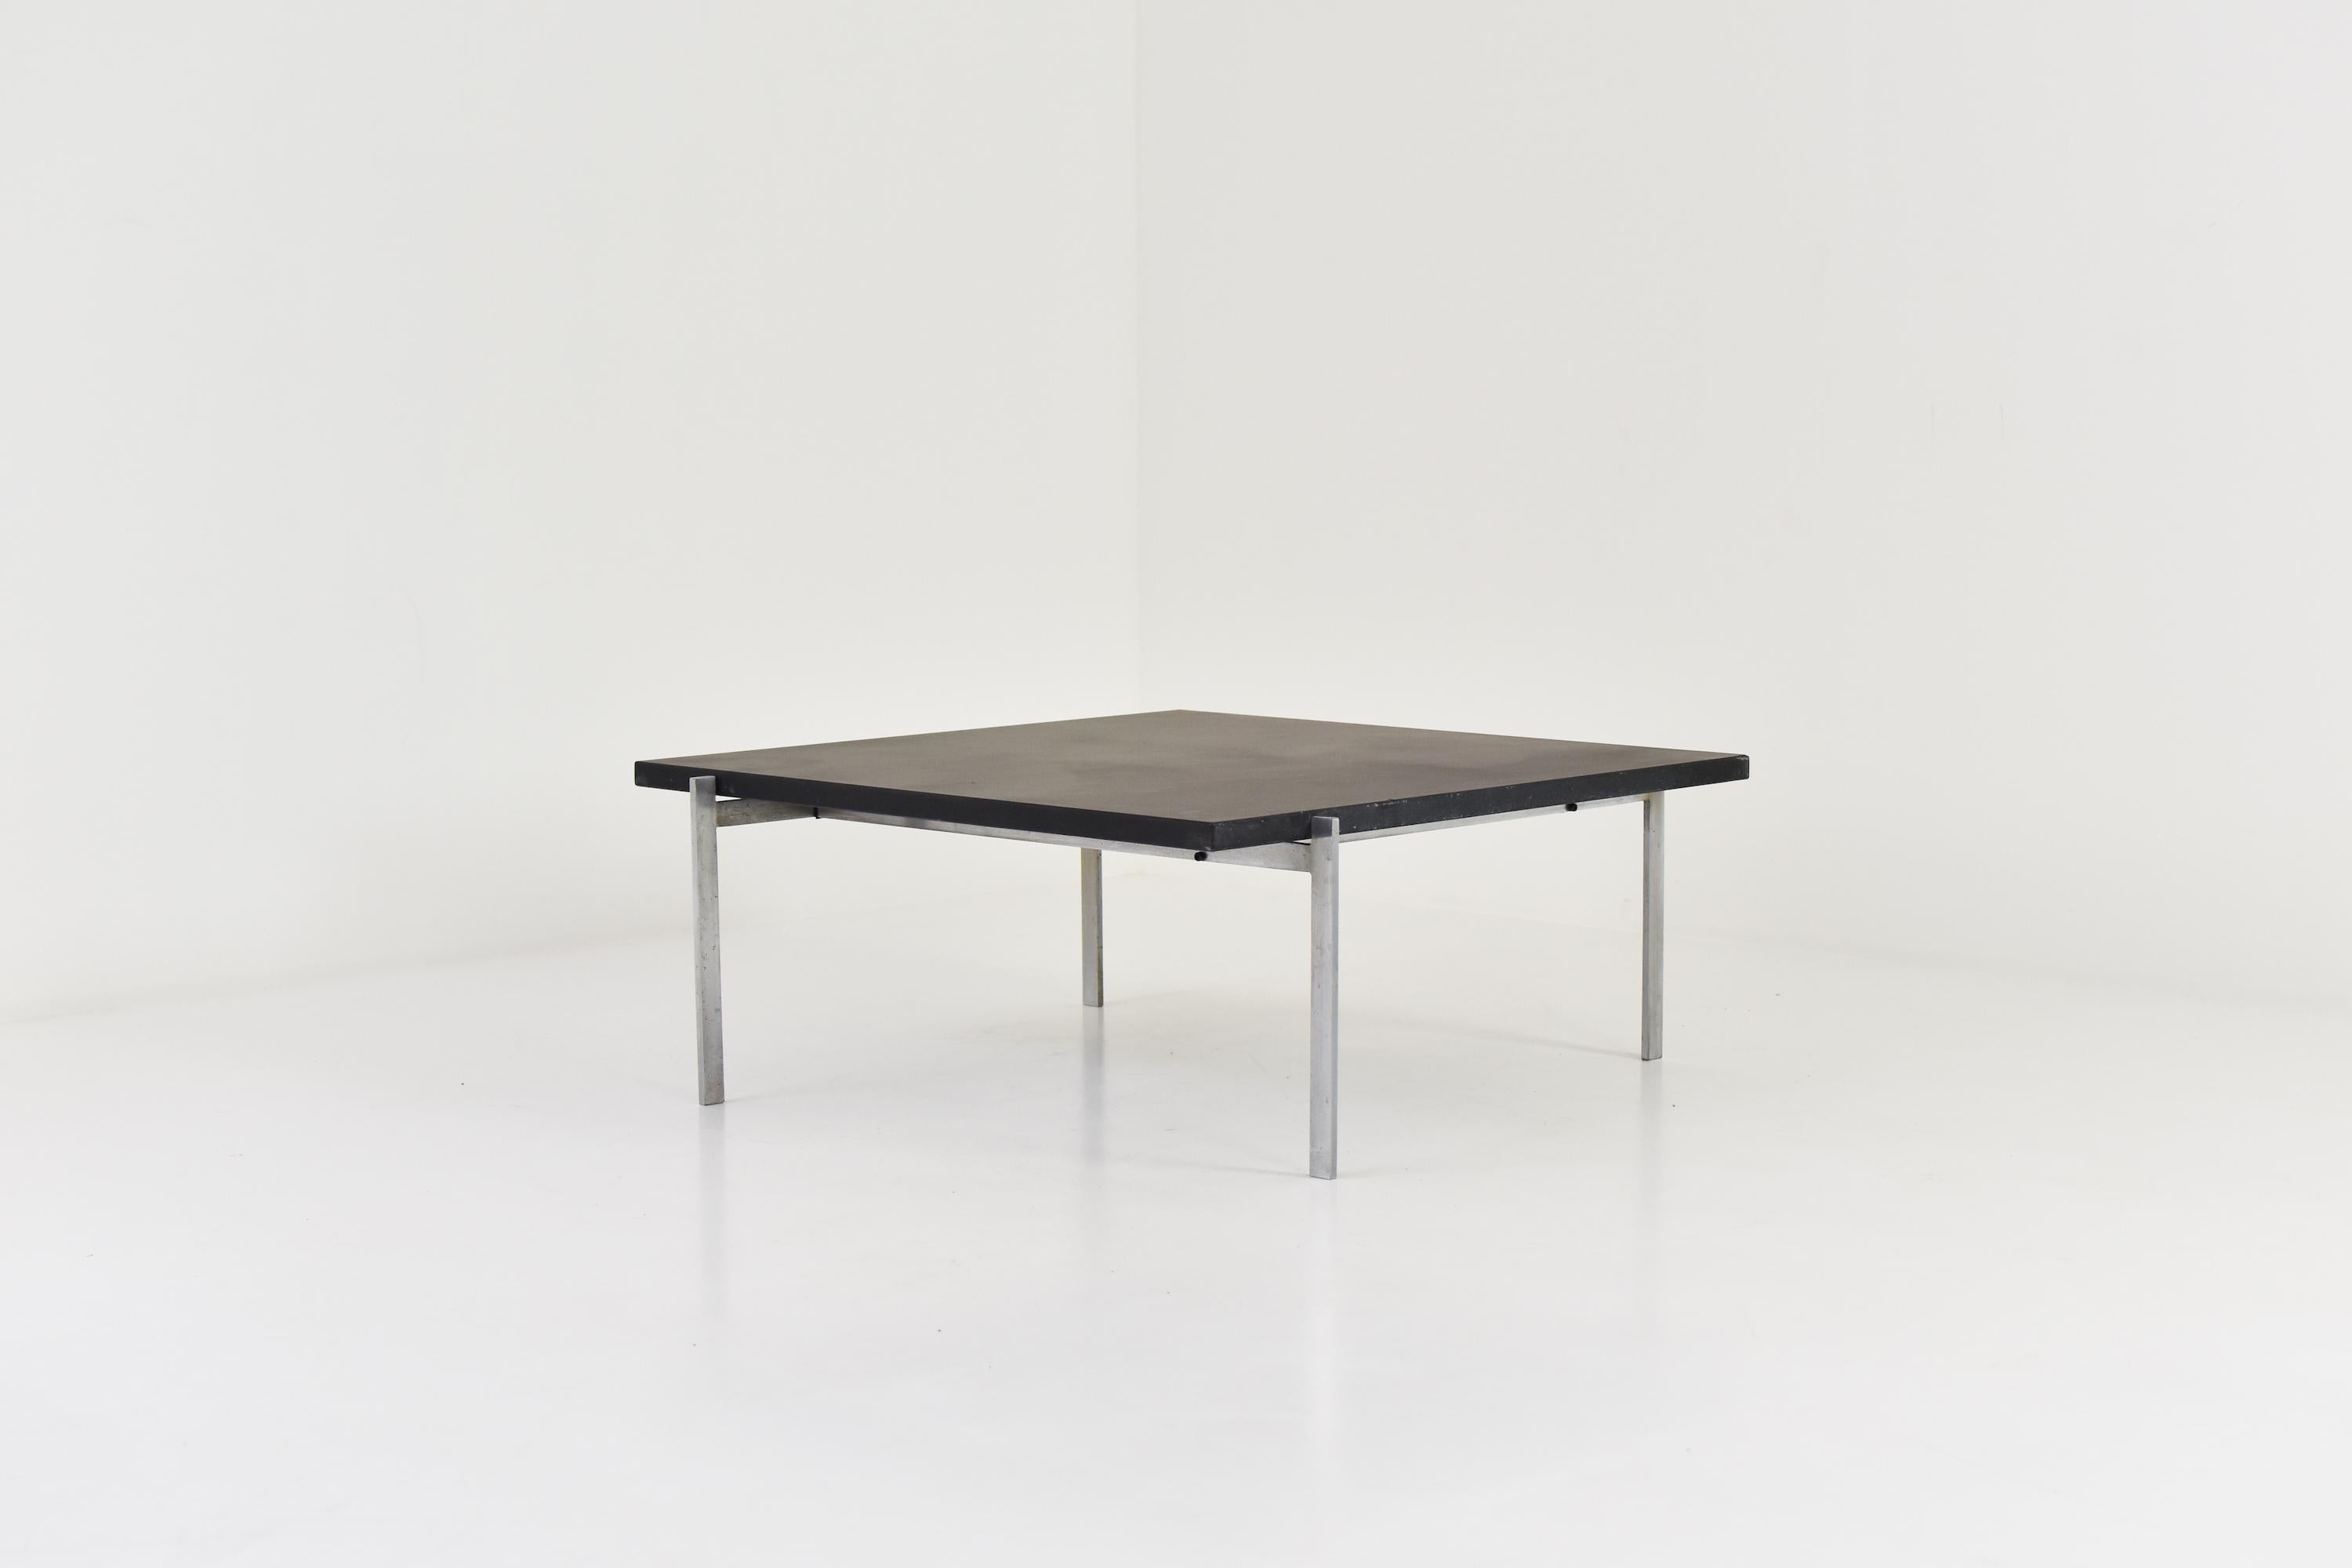 Square coffee table by Poul Kjaerholm for Fritz Hansen, Denmark, 1986. This is model PK61 and features a black slate stone and a matte chrome-plated steel frame. Designed in 1956 and still in production today. Some age related marks on the slate